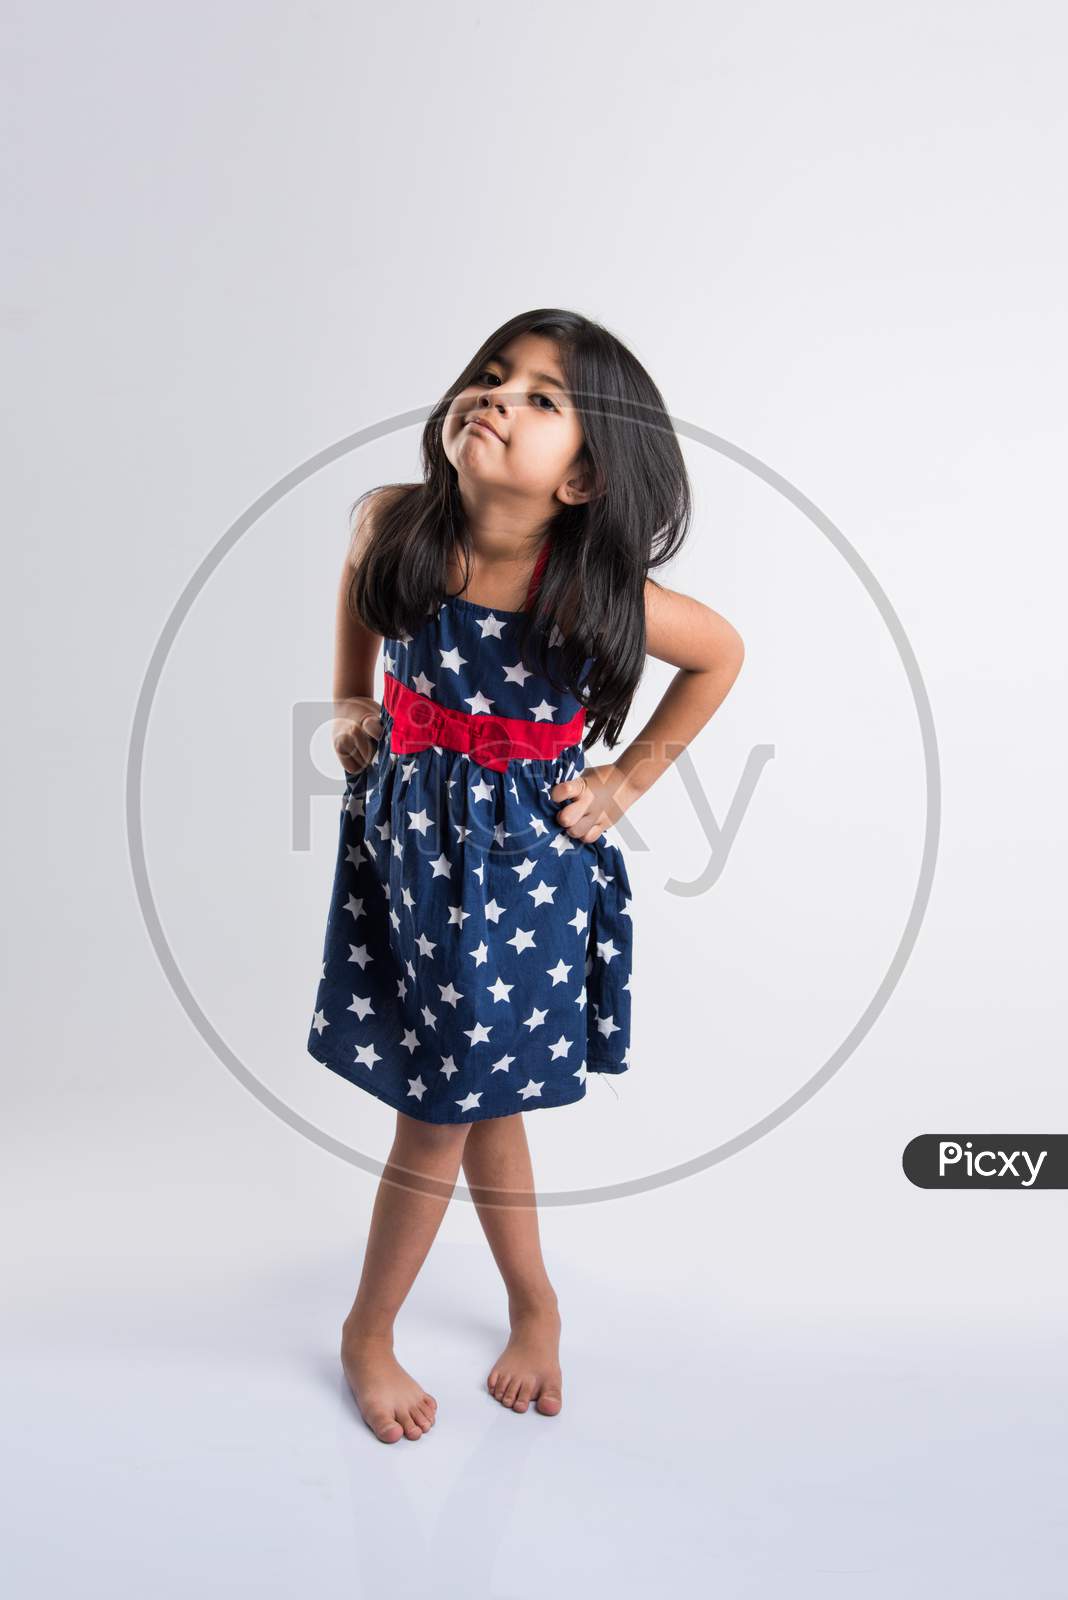 Indian cute girl over white background